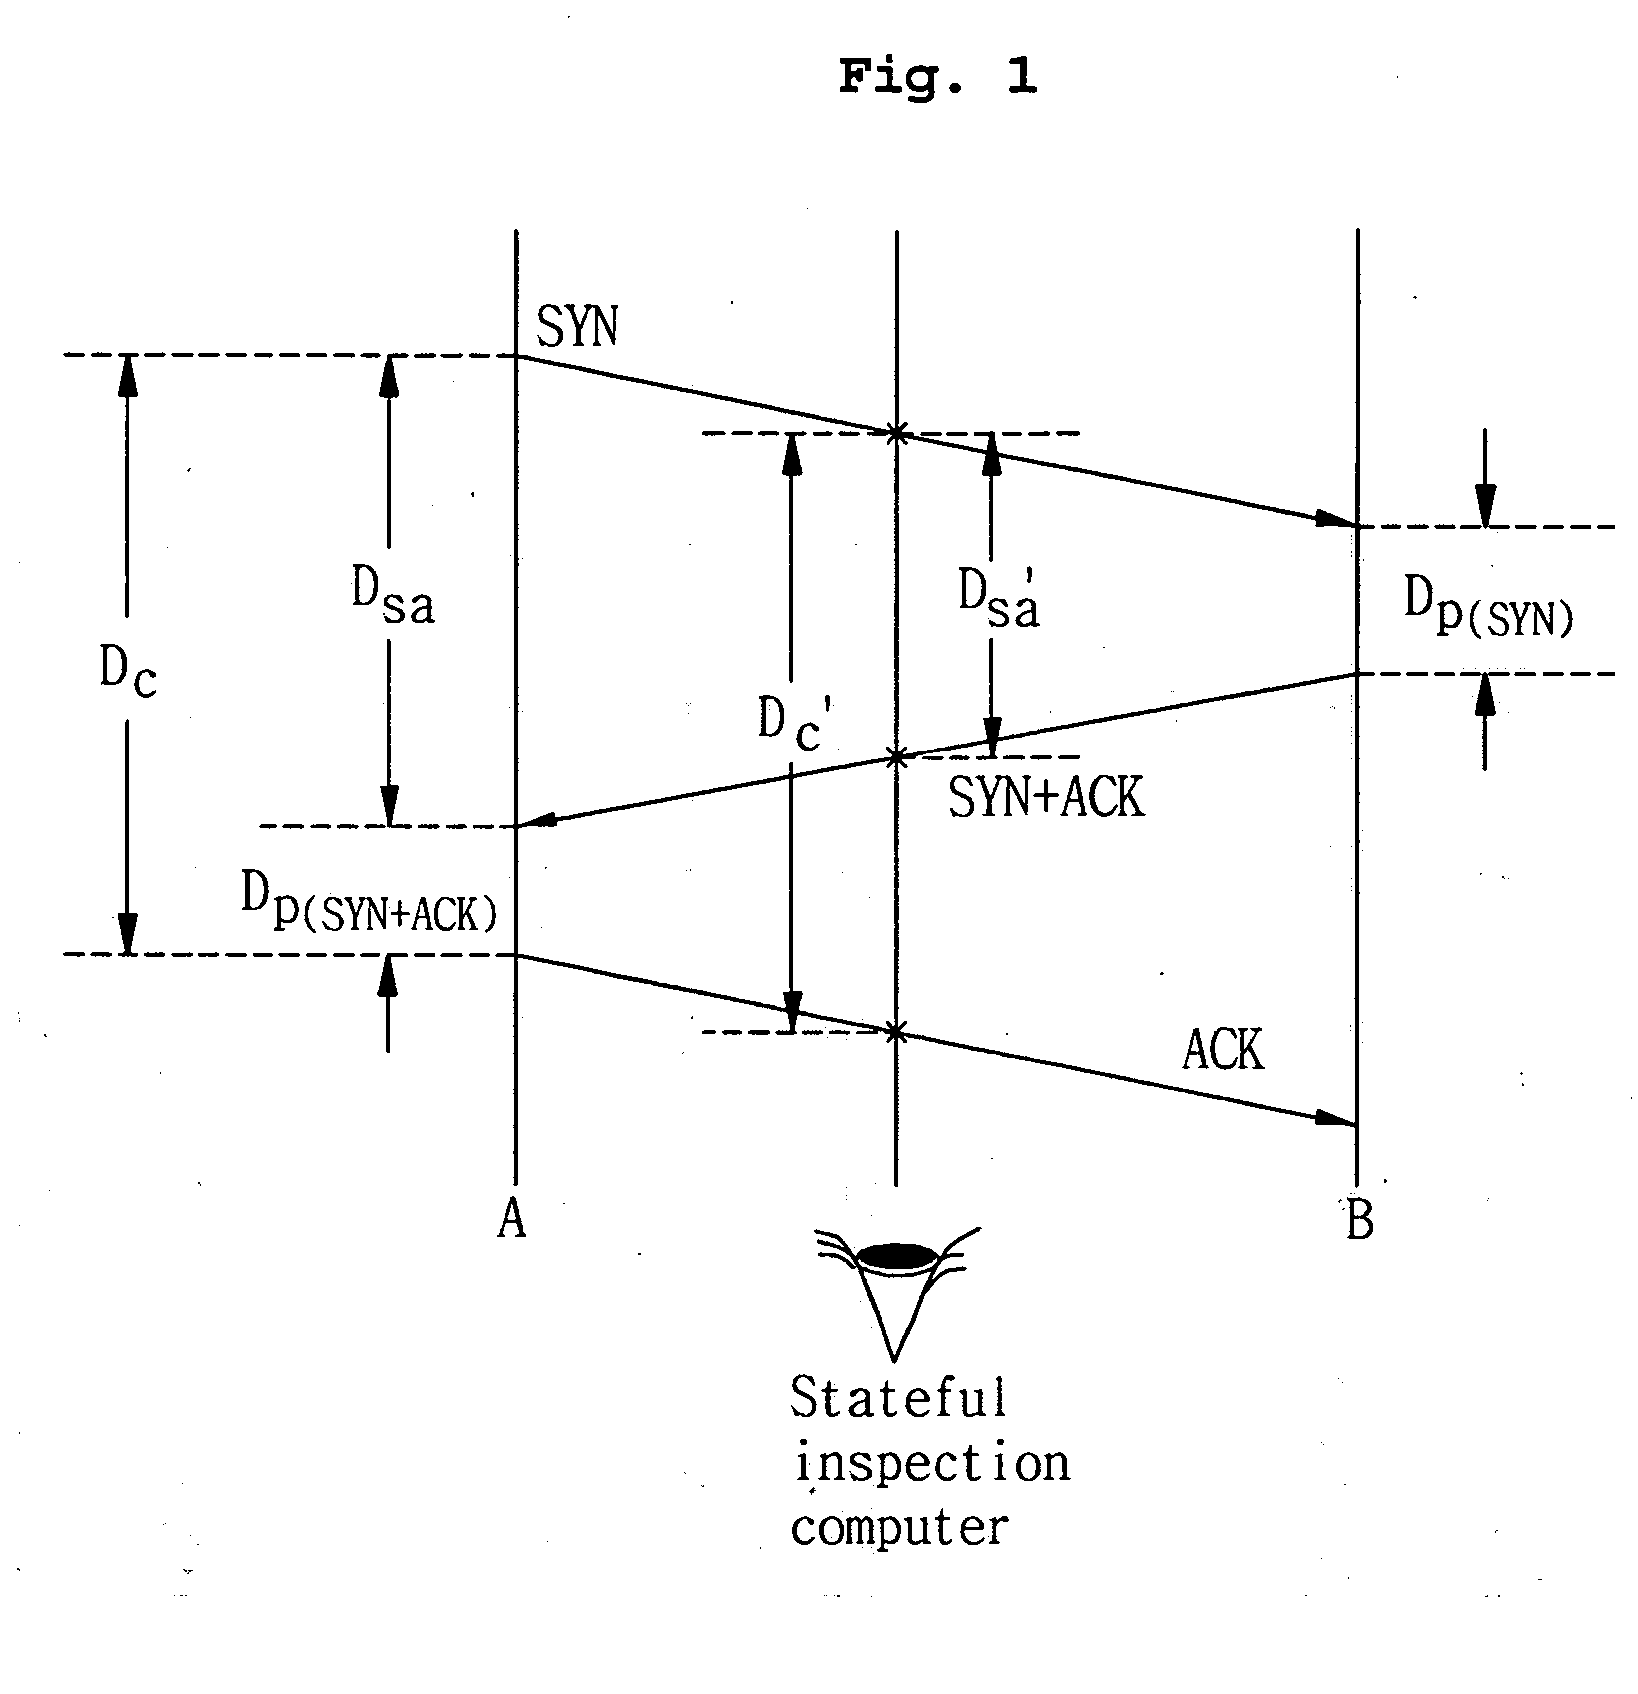 Method of improving security performance in stateful inspection of TCP connections